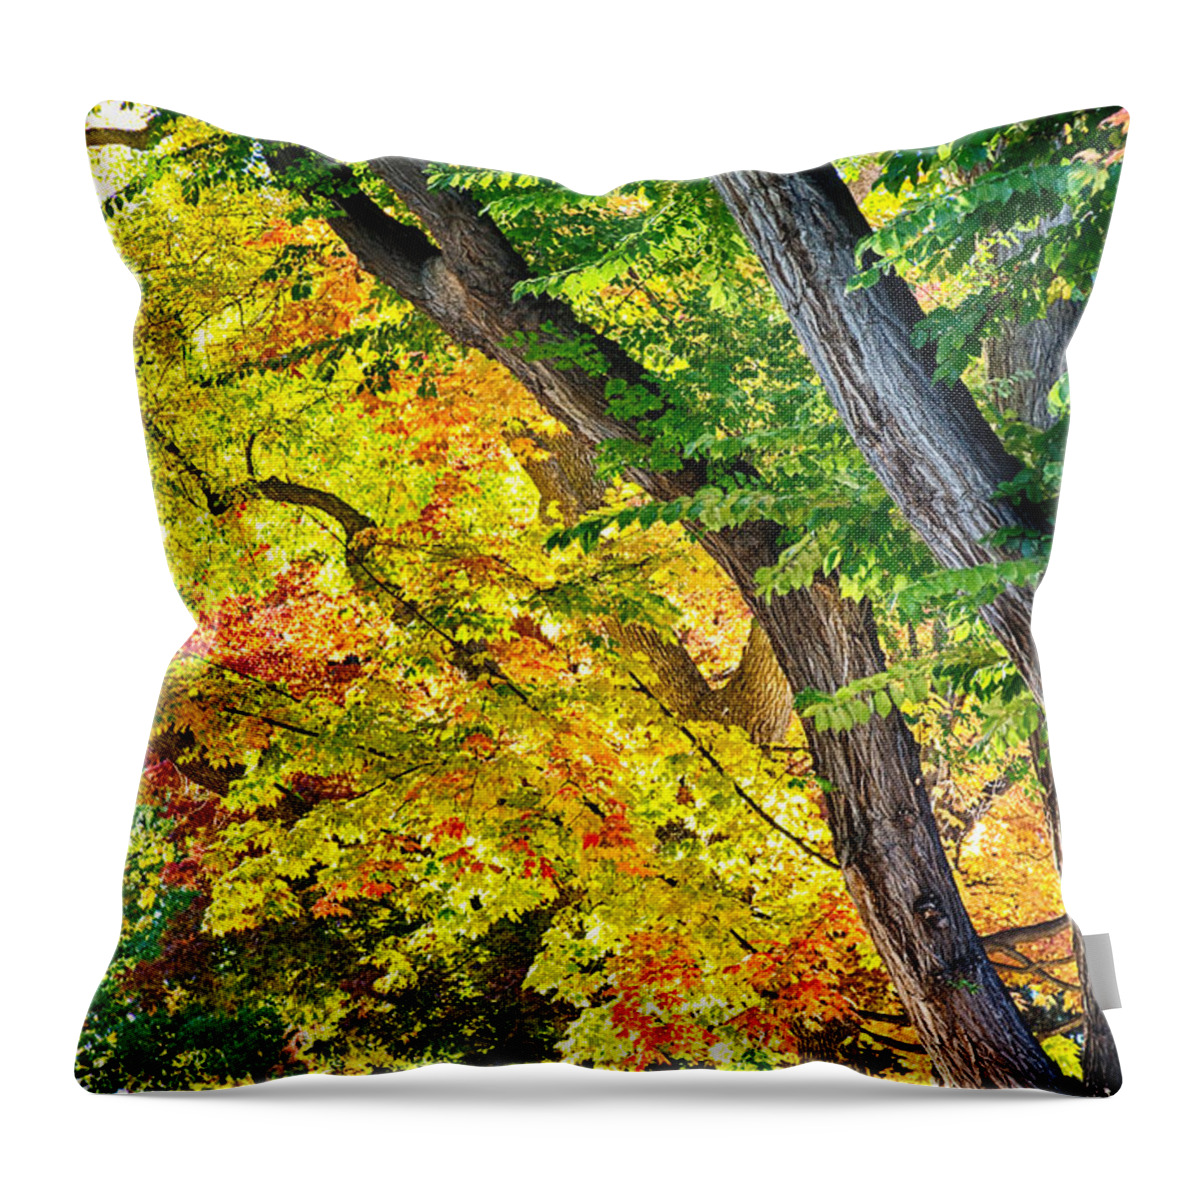 Autumn Throw Pillow featuring the photograph Autumn Season Leaves in Full Glory by James BO Insogna